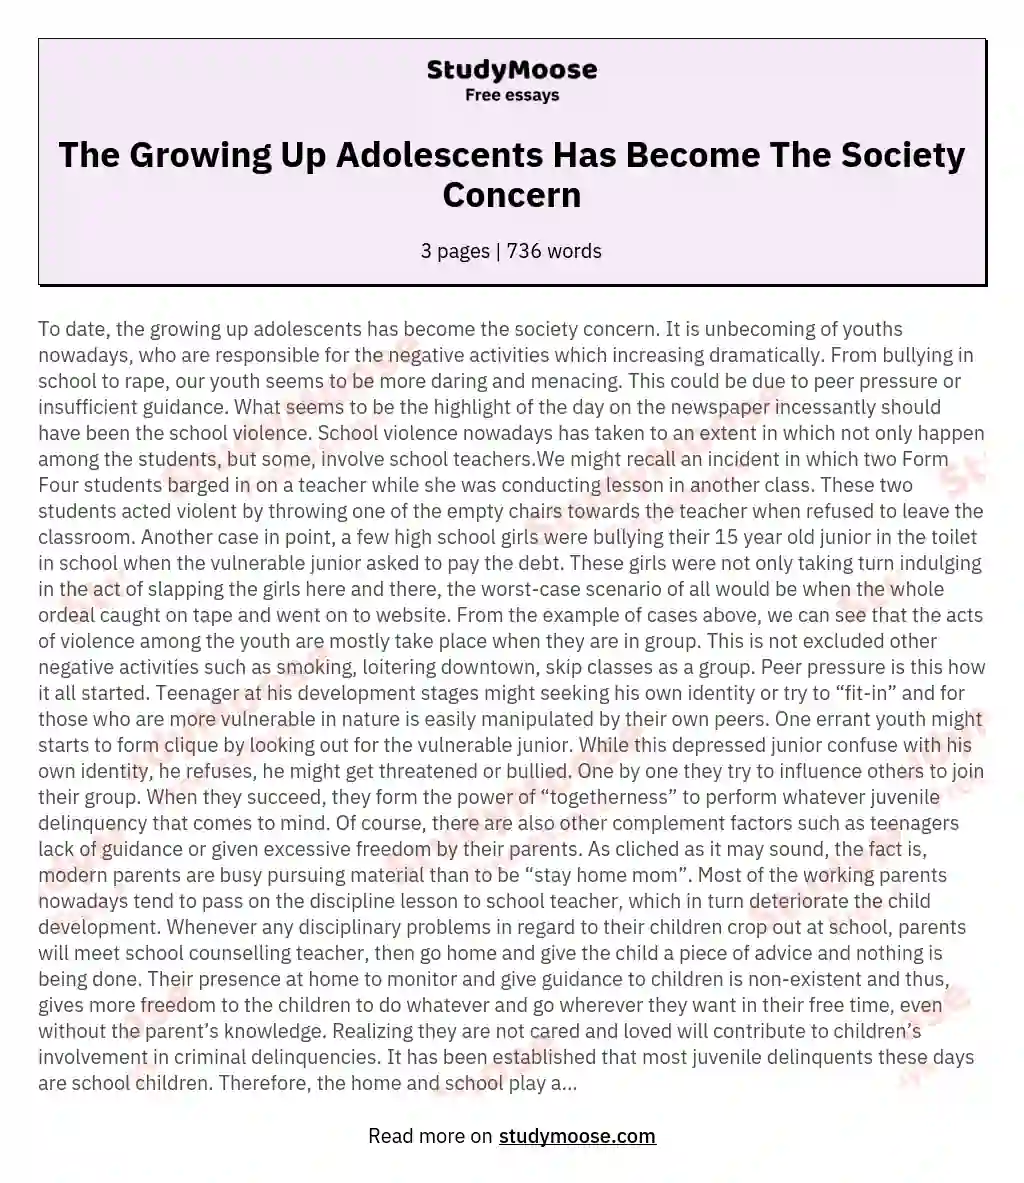 The Growing Up Adolescents Has Become The Society Concern